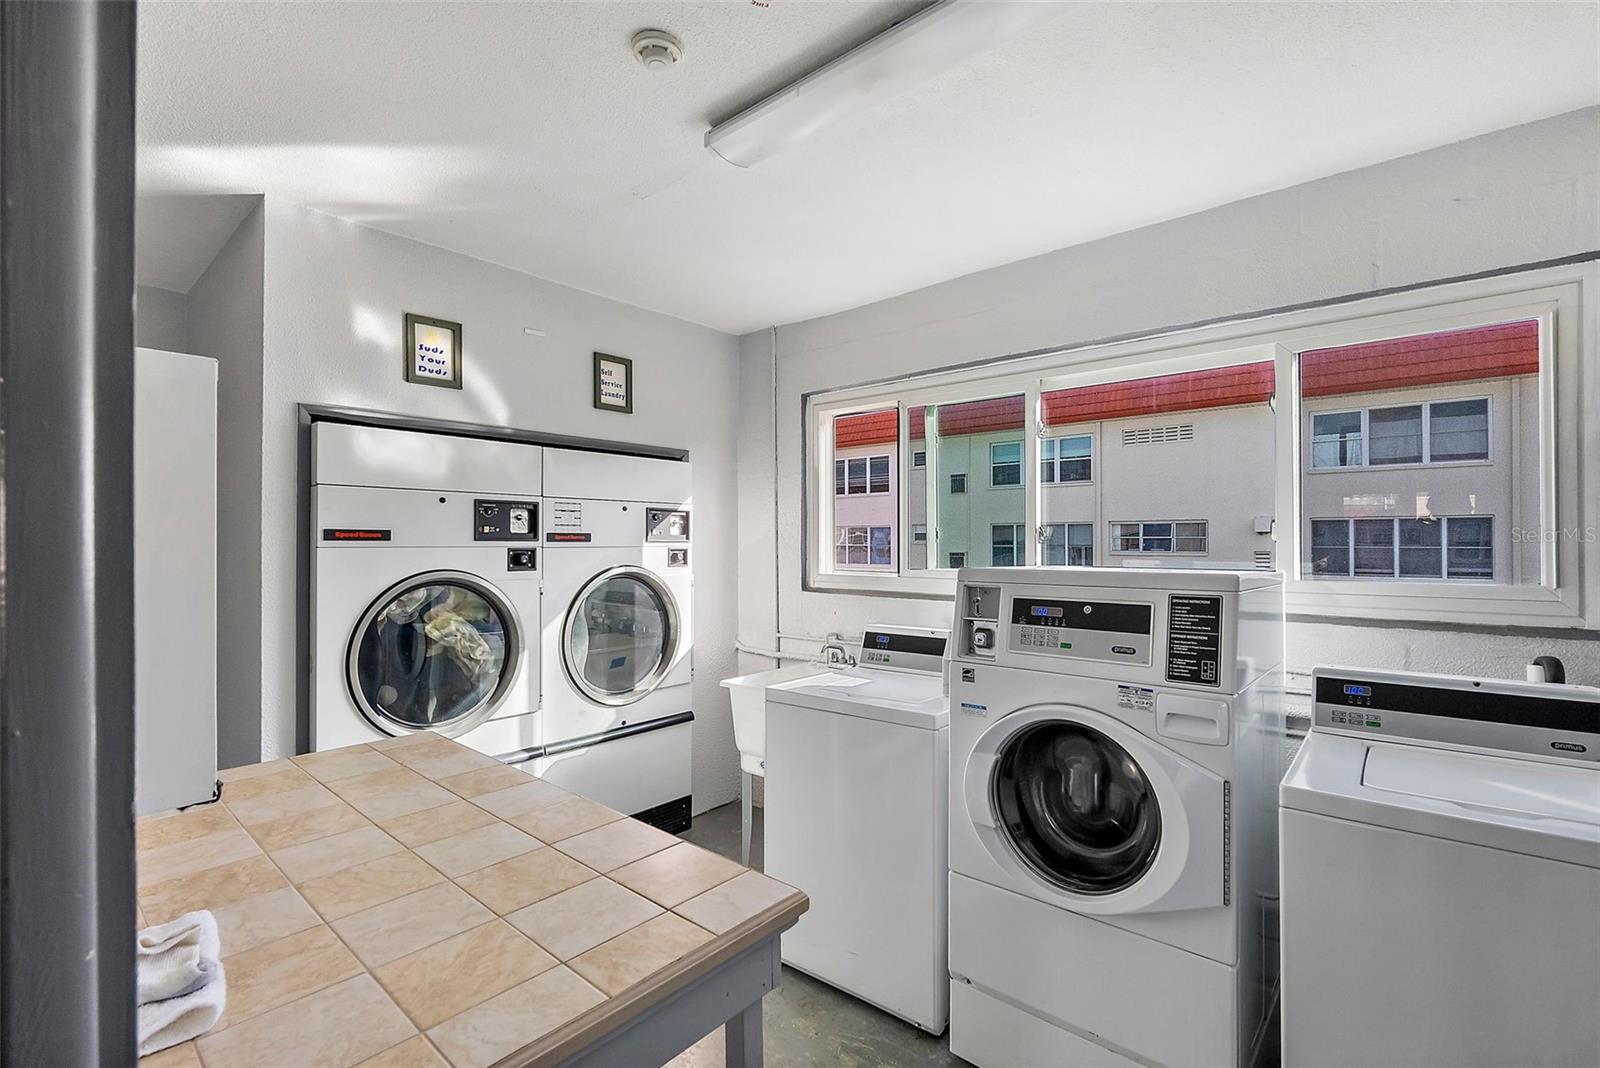 The laundry room is on the third floor.